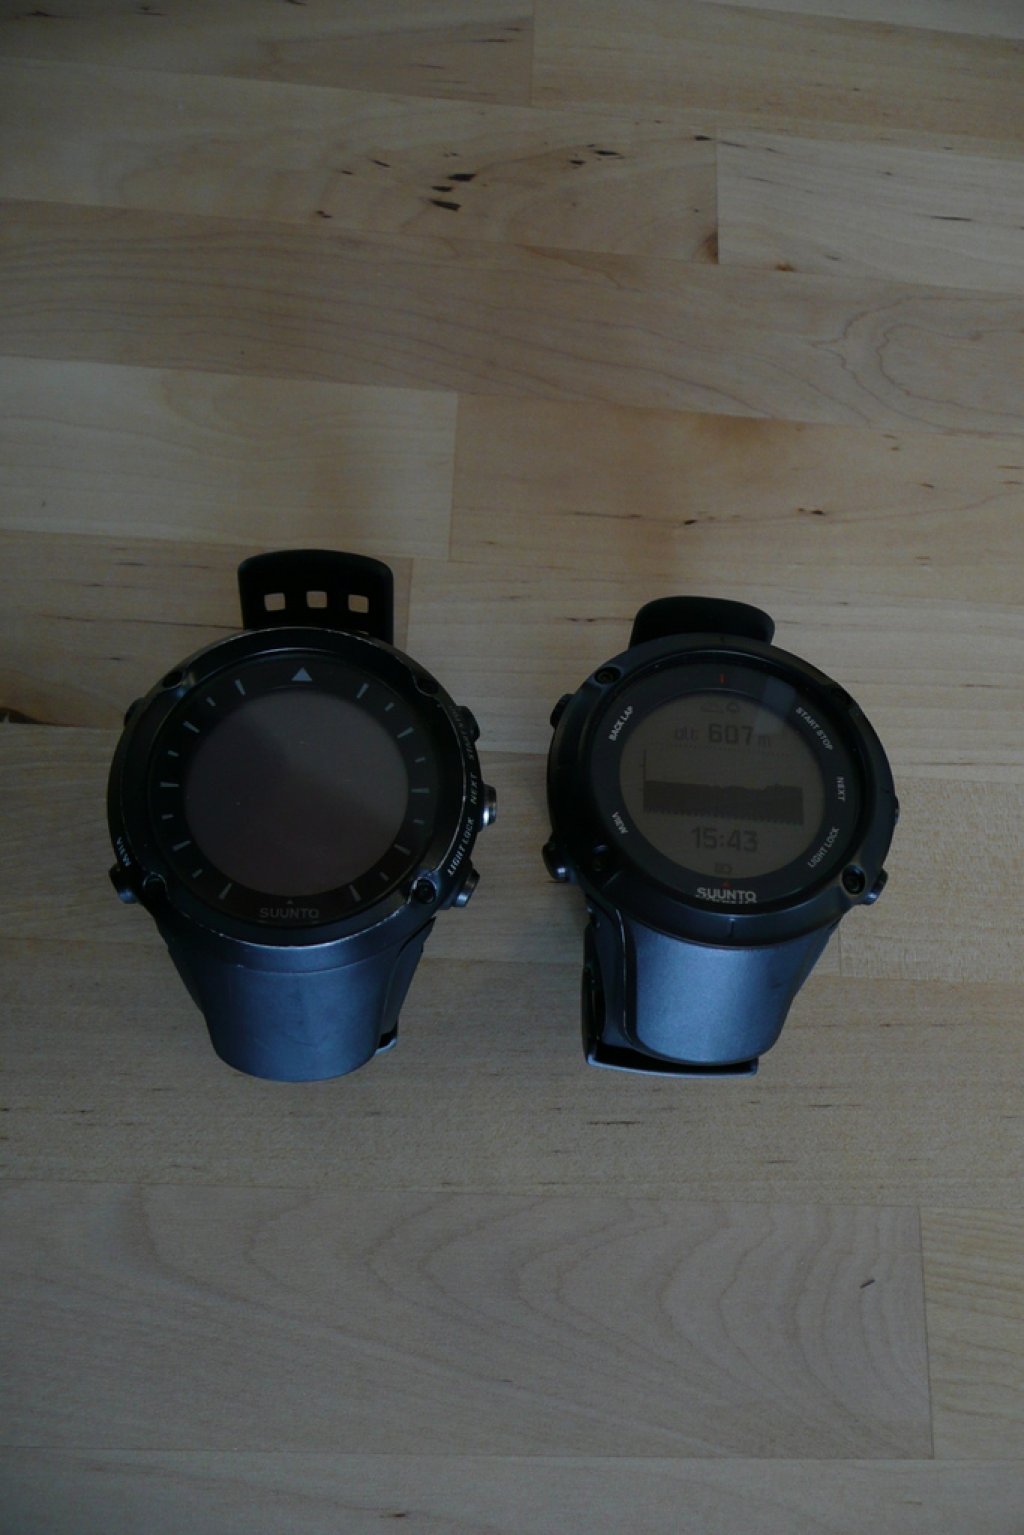 Ambit 1 (left) and Ambit 3 (right)